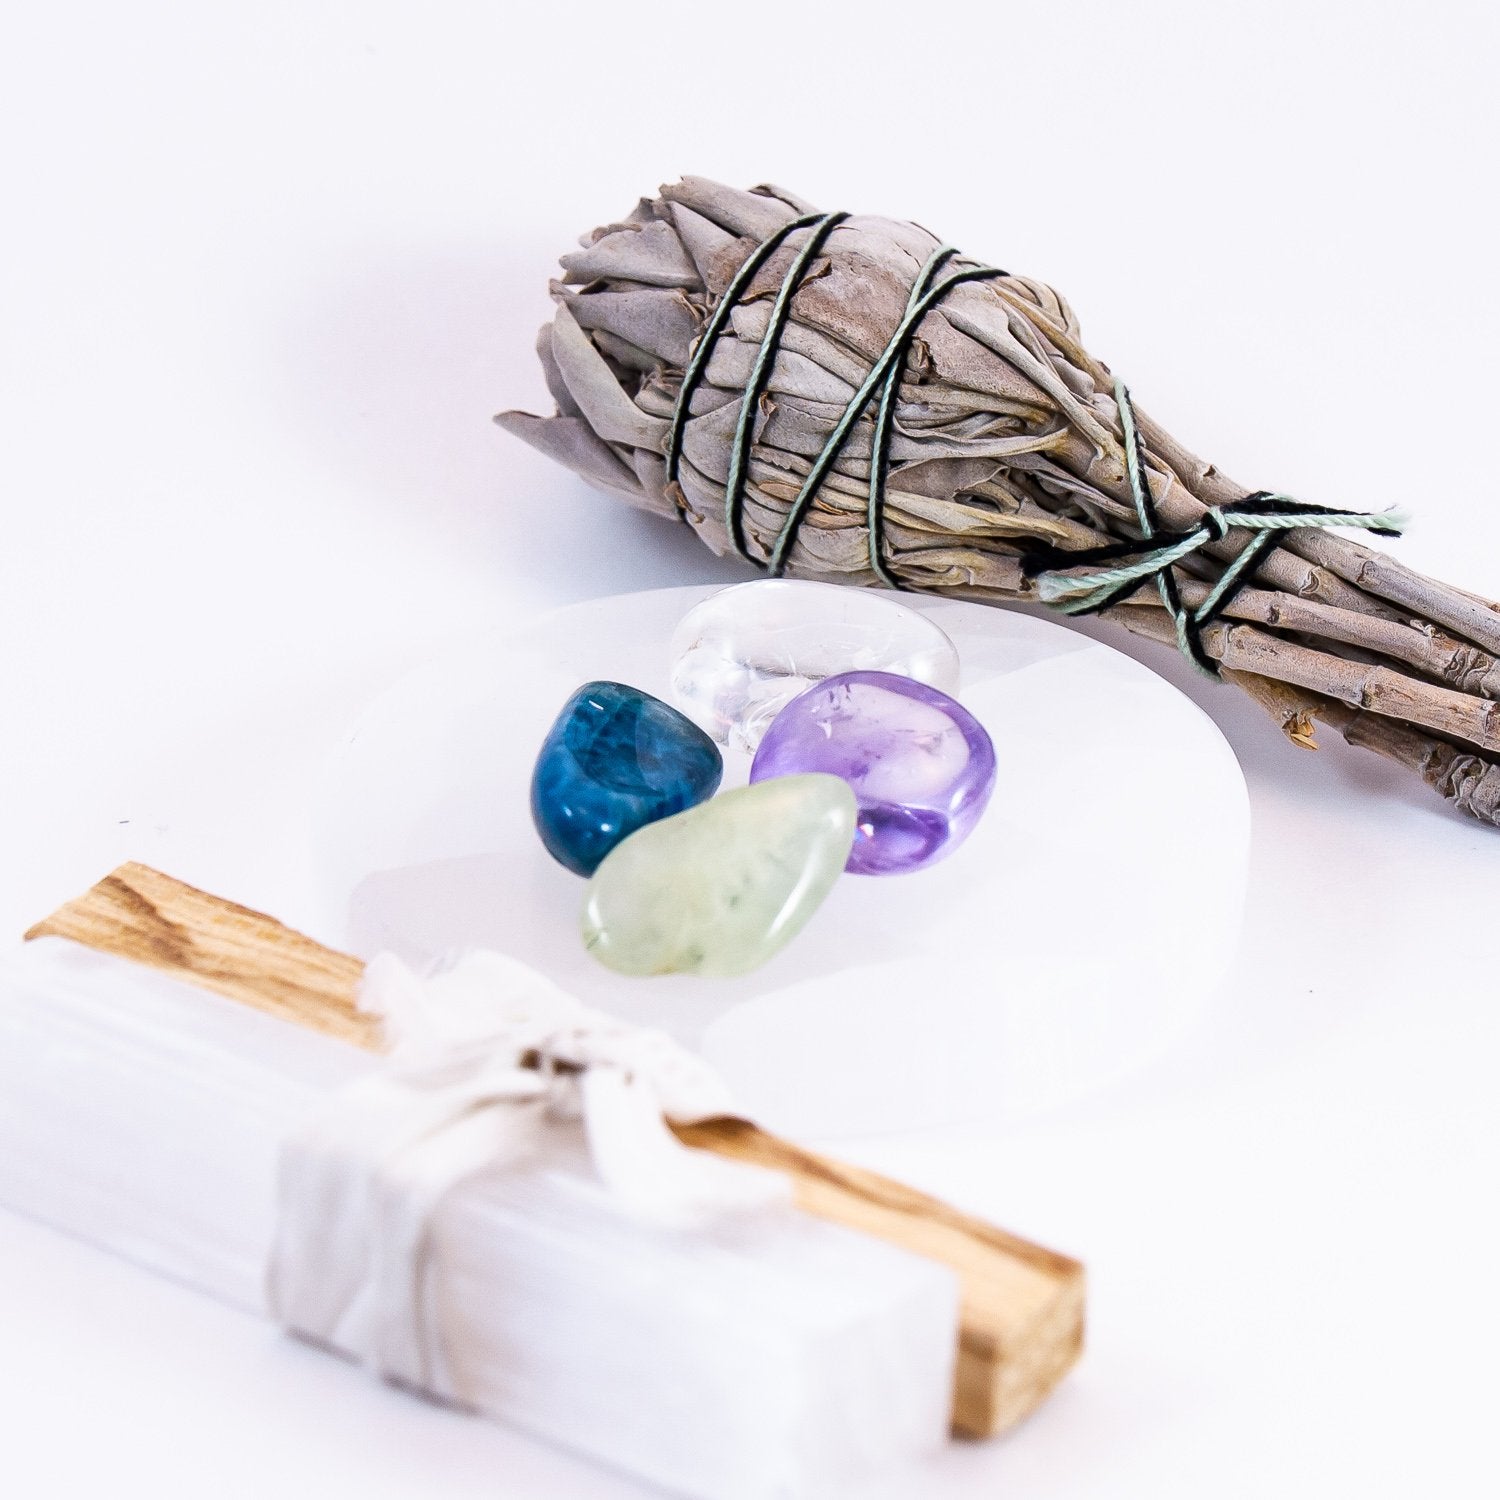 enlightened action crystal set. amethyst, blue apatite, prehnite, and clear quartz. kit includes, 1 white sage smudge, 1 palo santo stick, and 1 selenite mini wand.